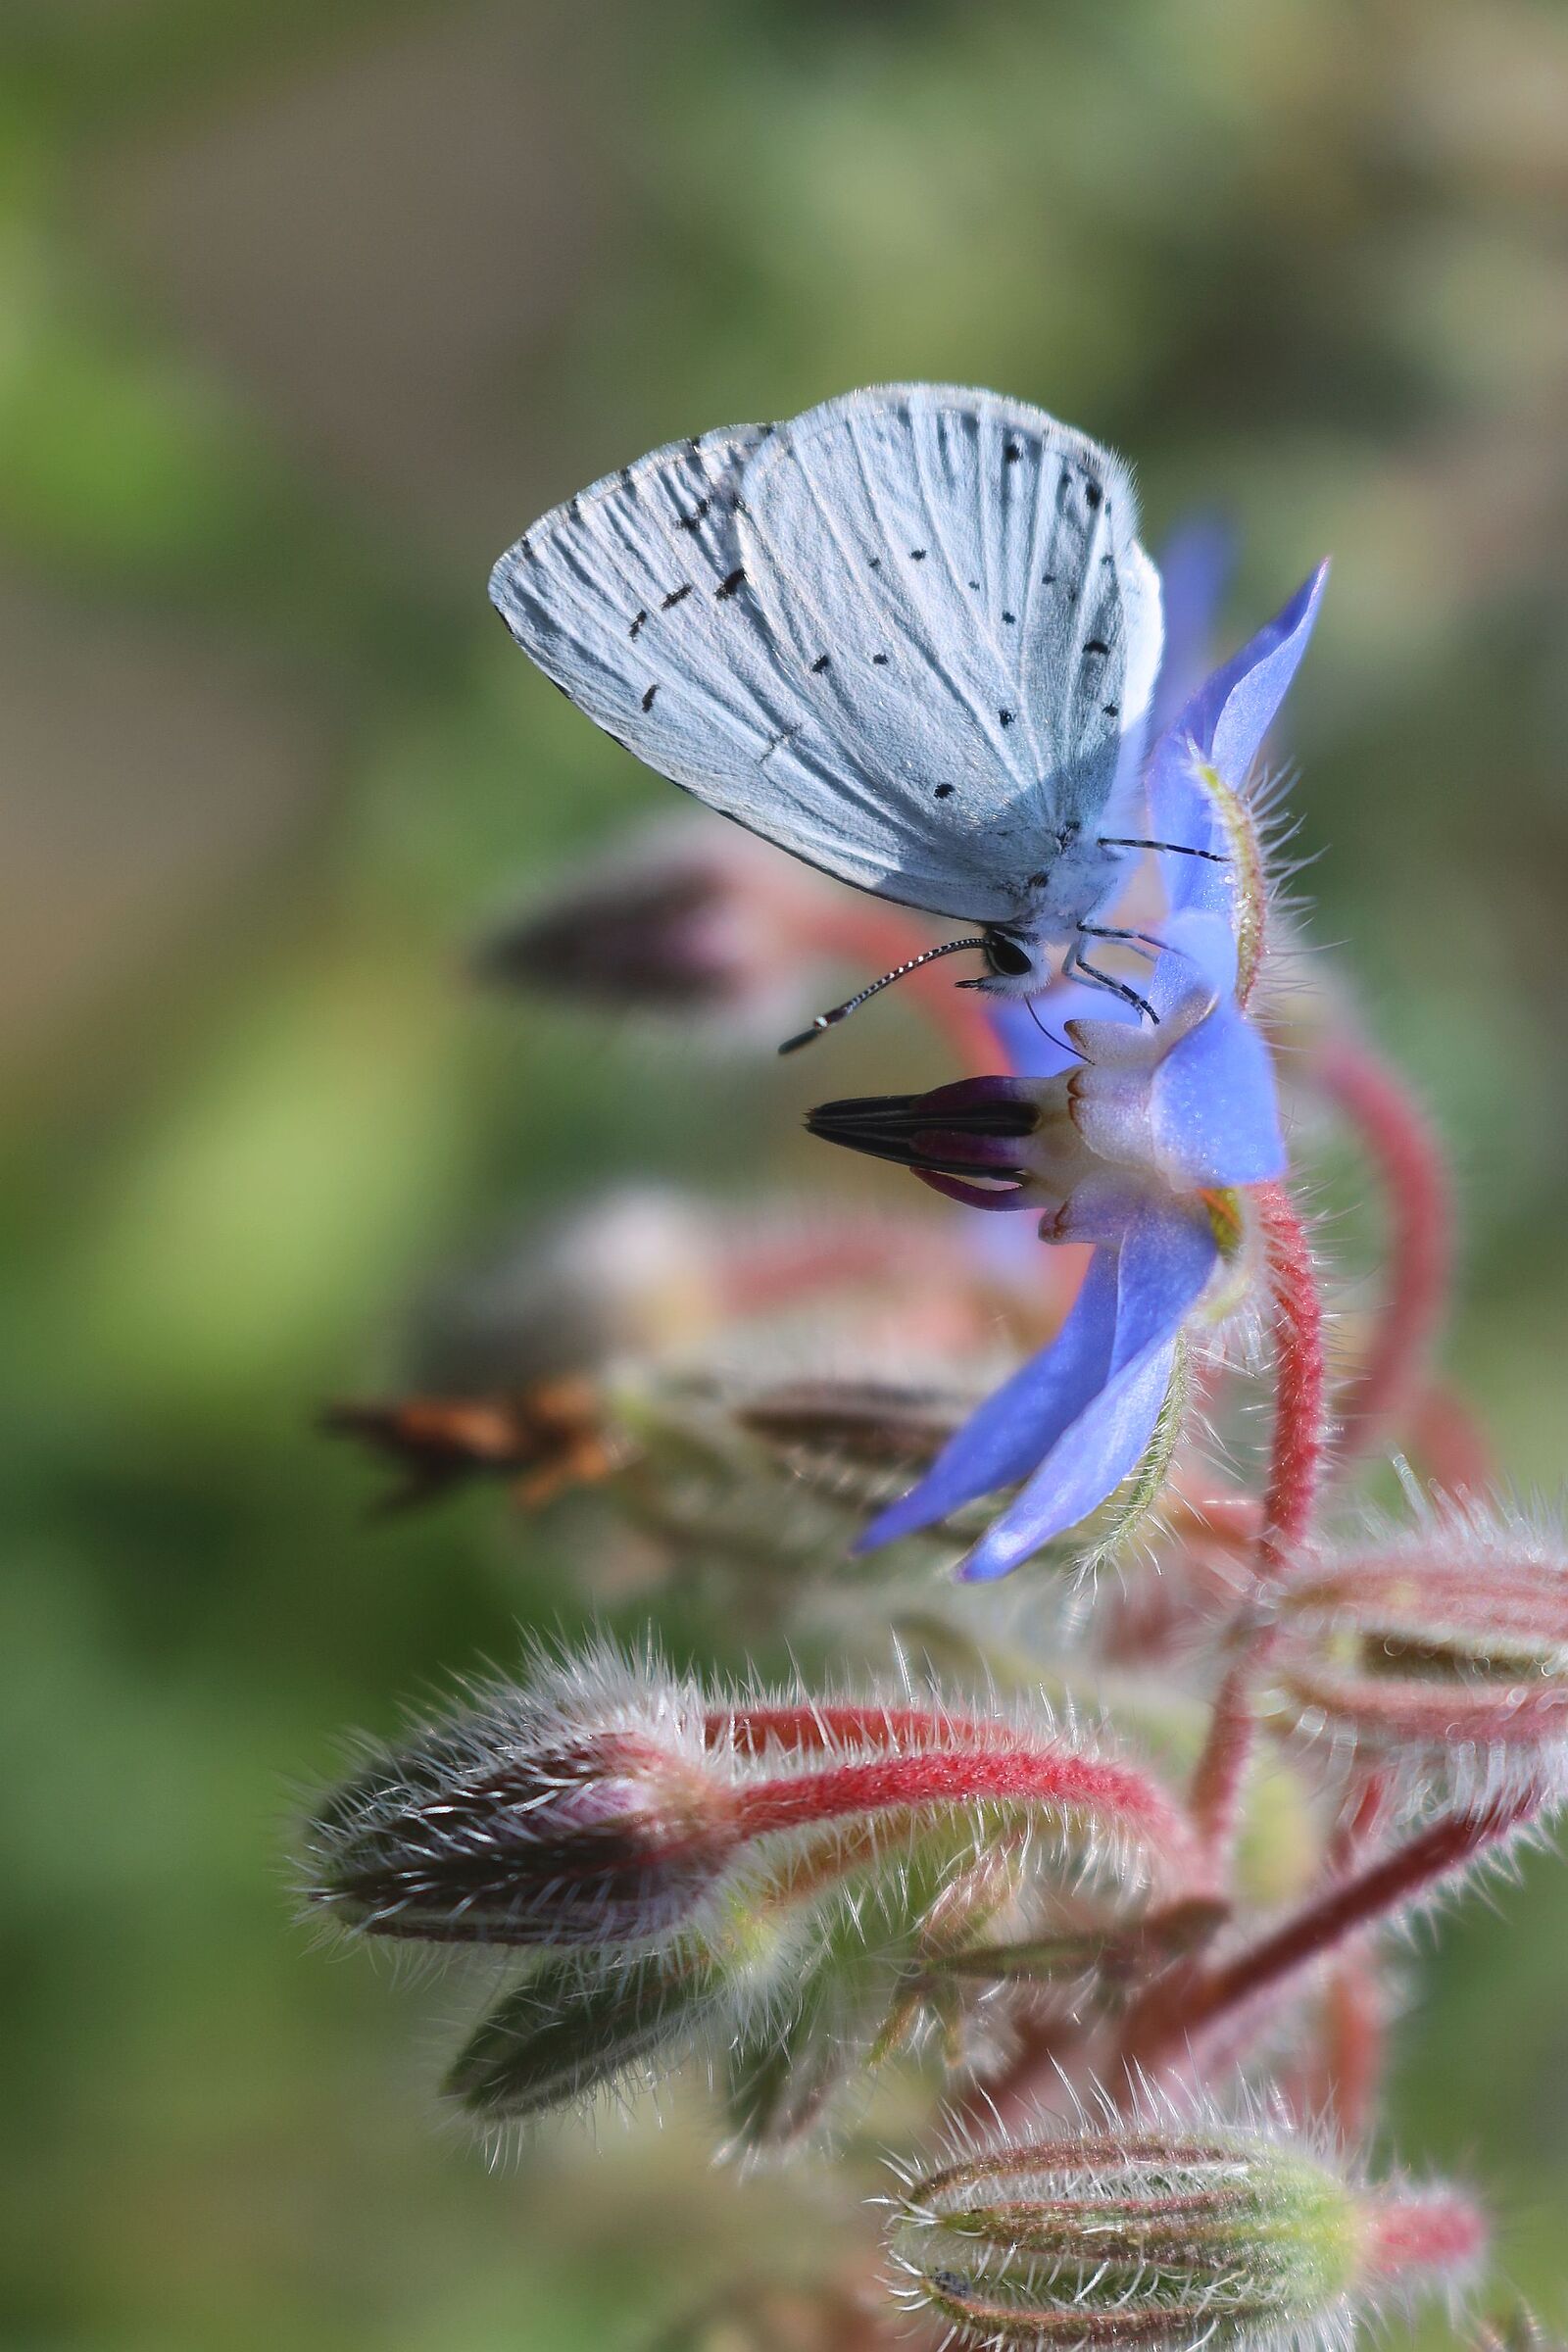 laid on the blue of the borage...